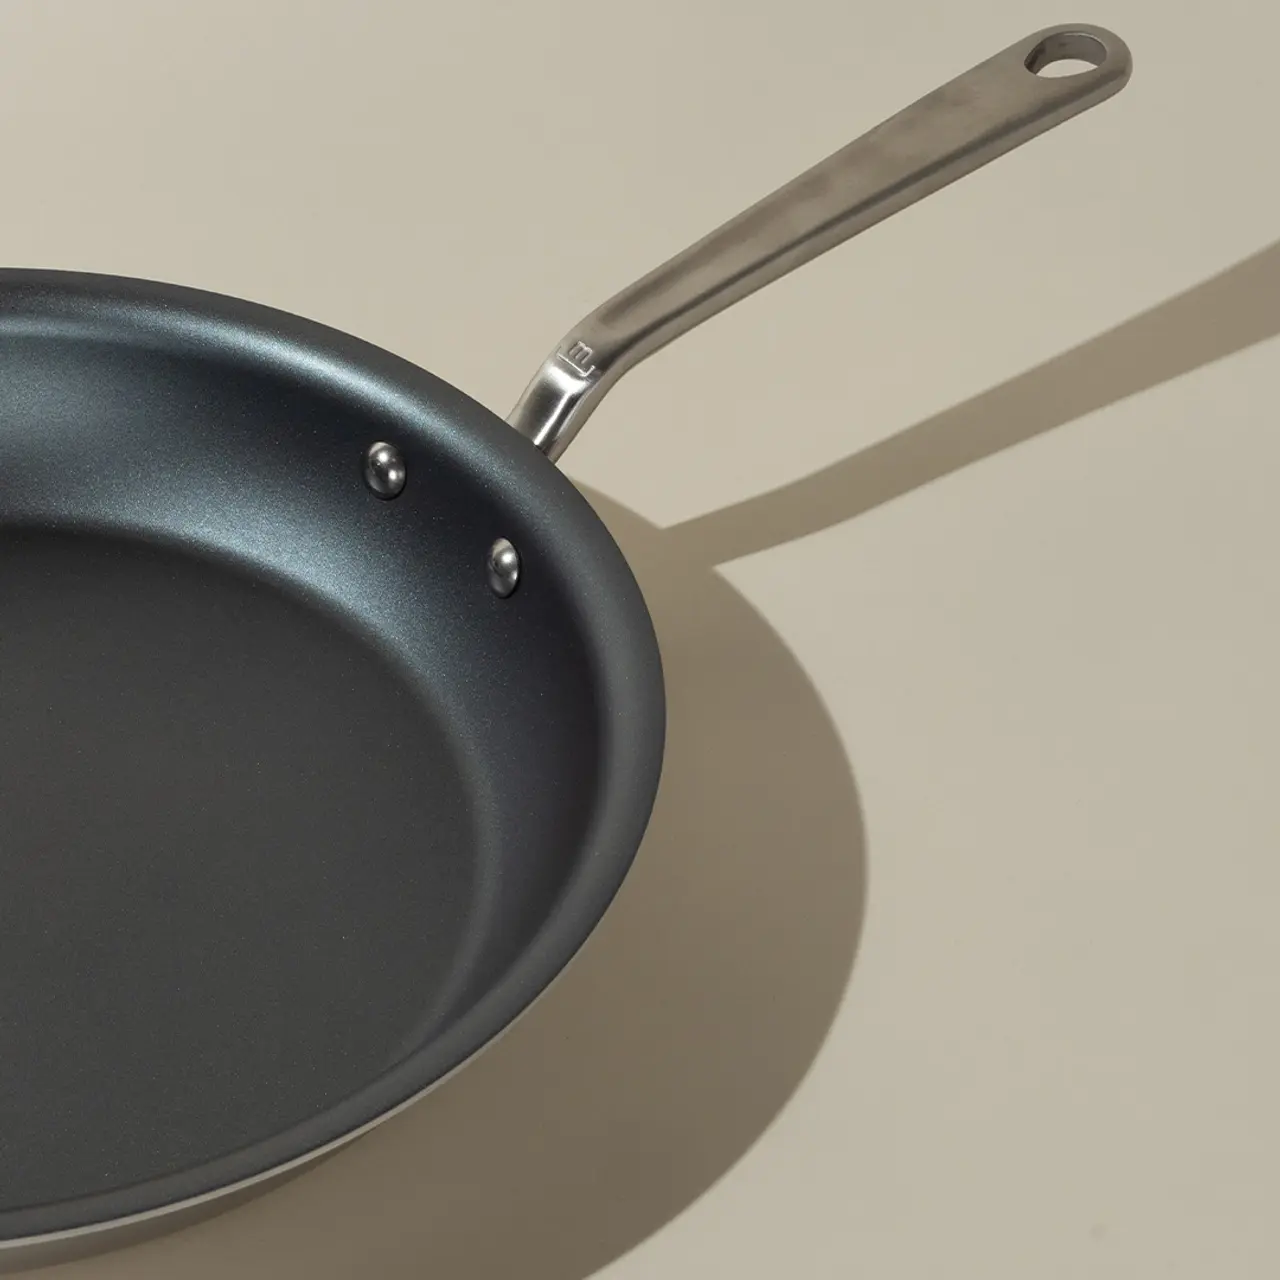 A non-stick frying pan with a stainless steel handle is presented against a neutral background, casting a soft shadow.